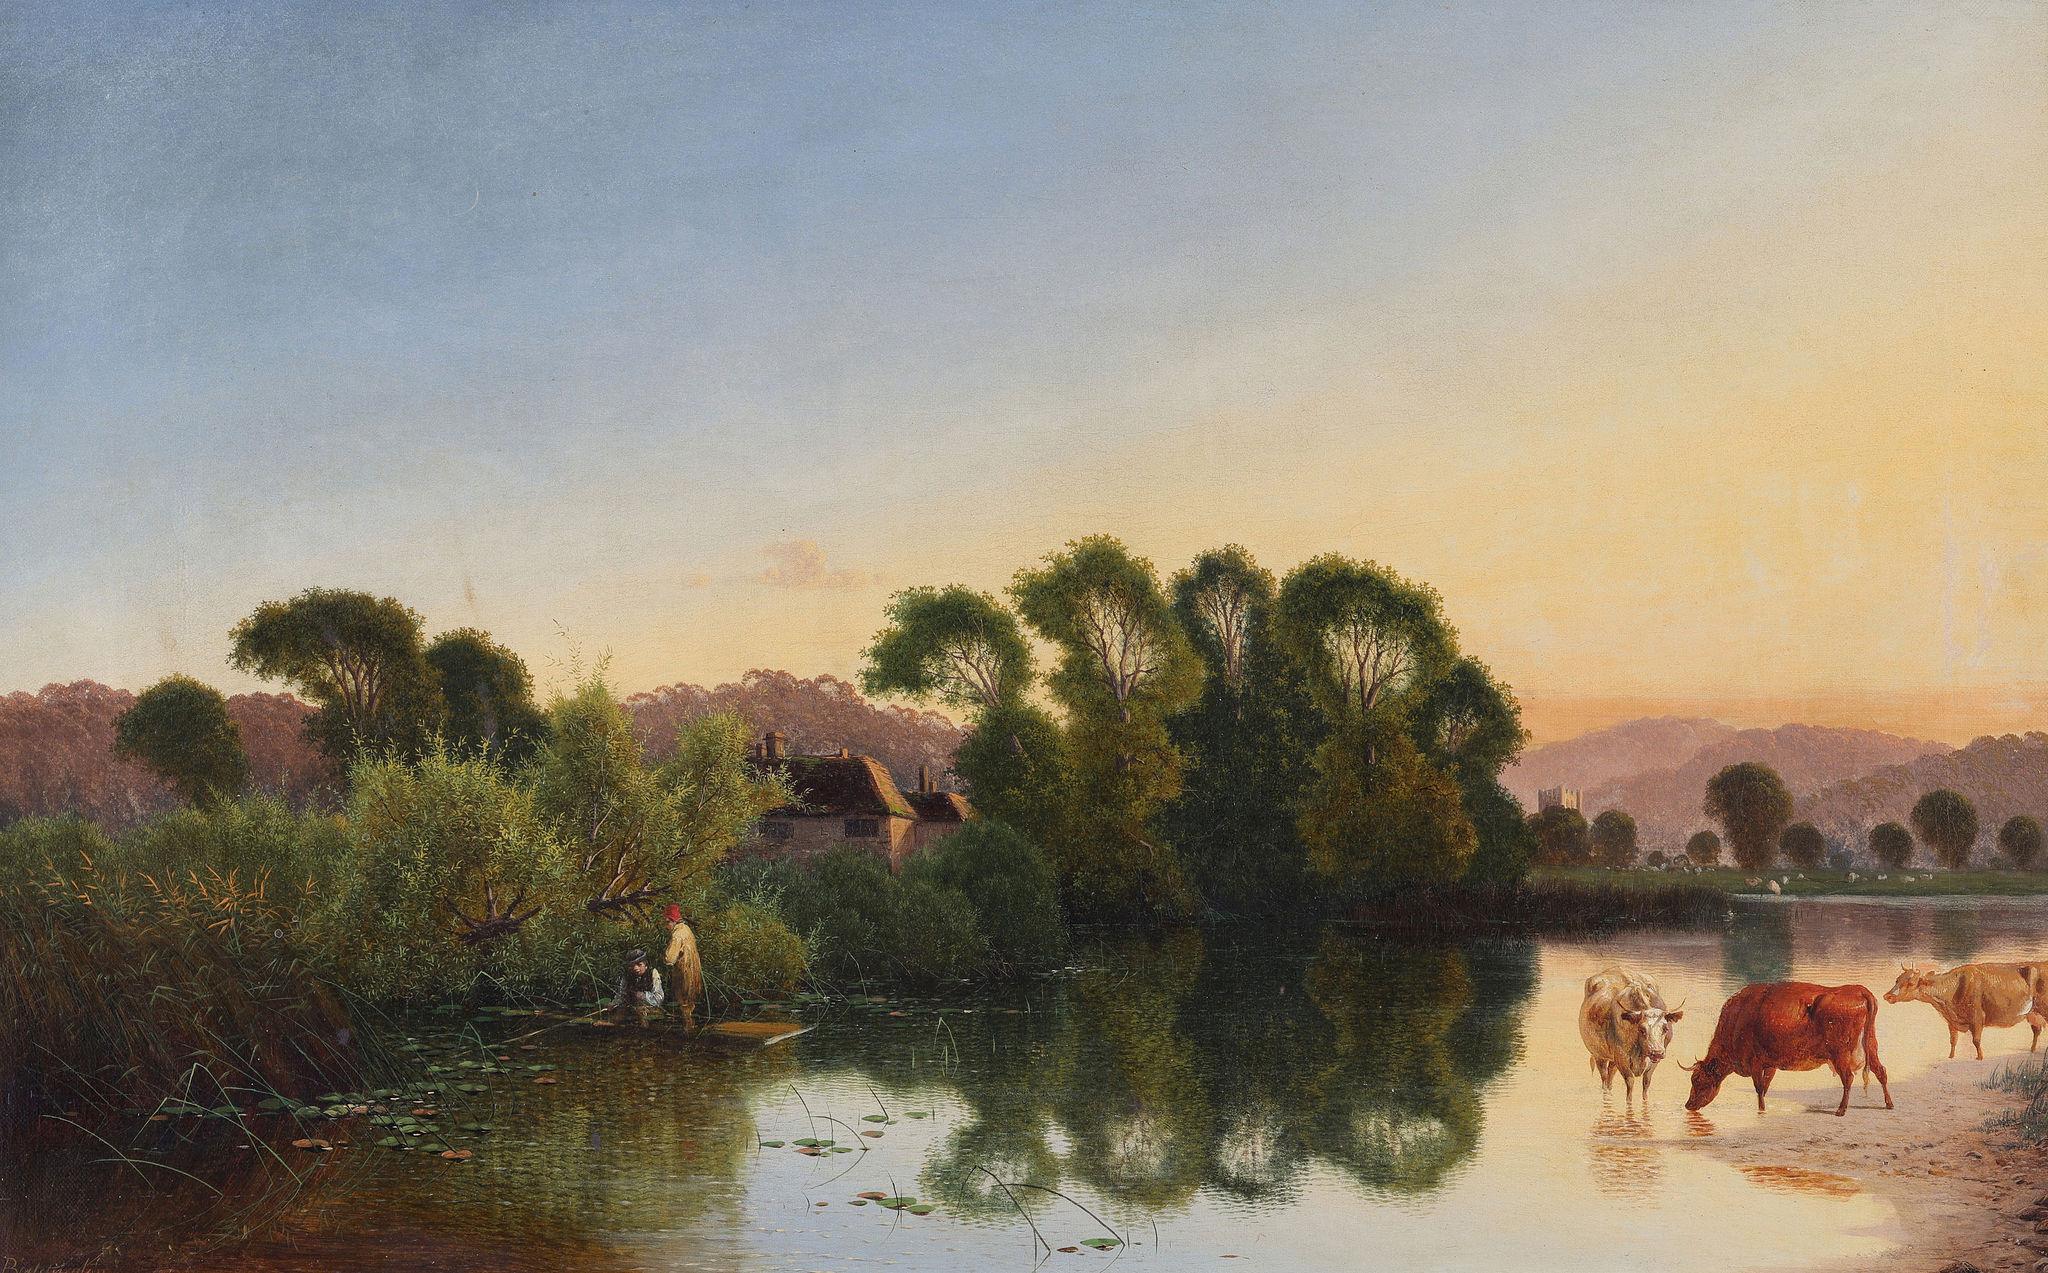 Fishing with Cattle Watering - Painting by Edwin H Boddington